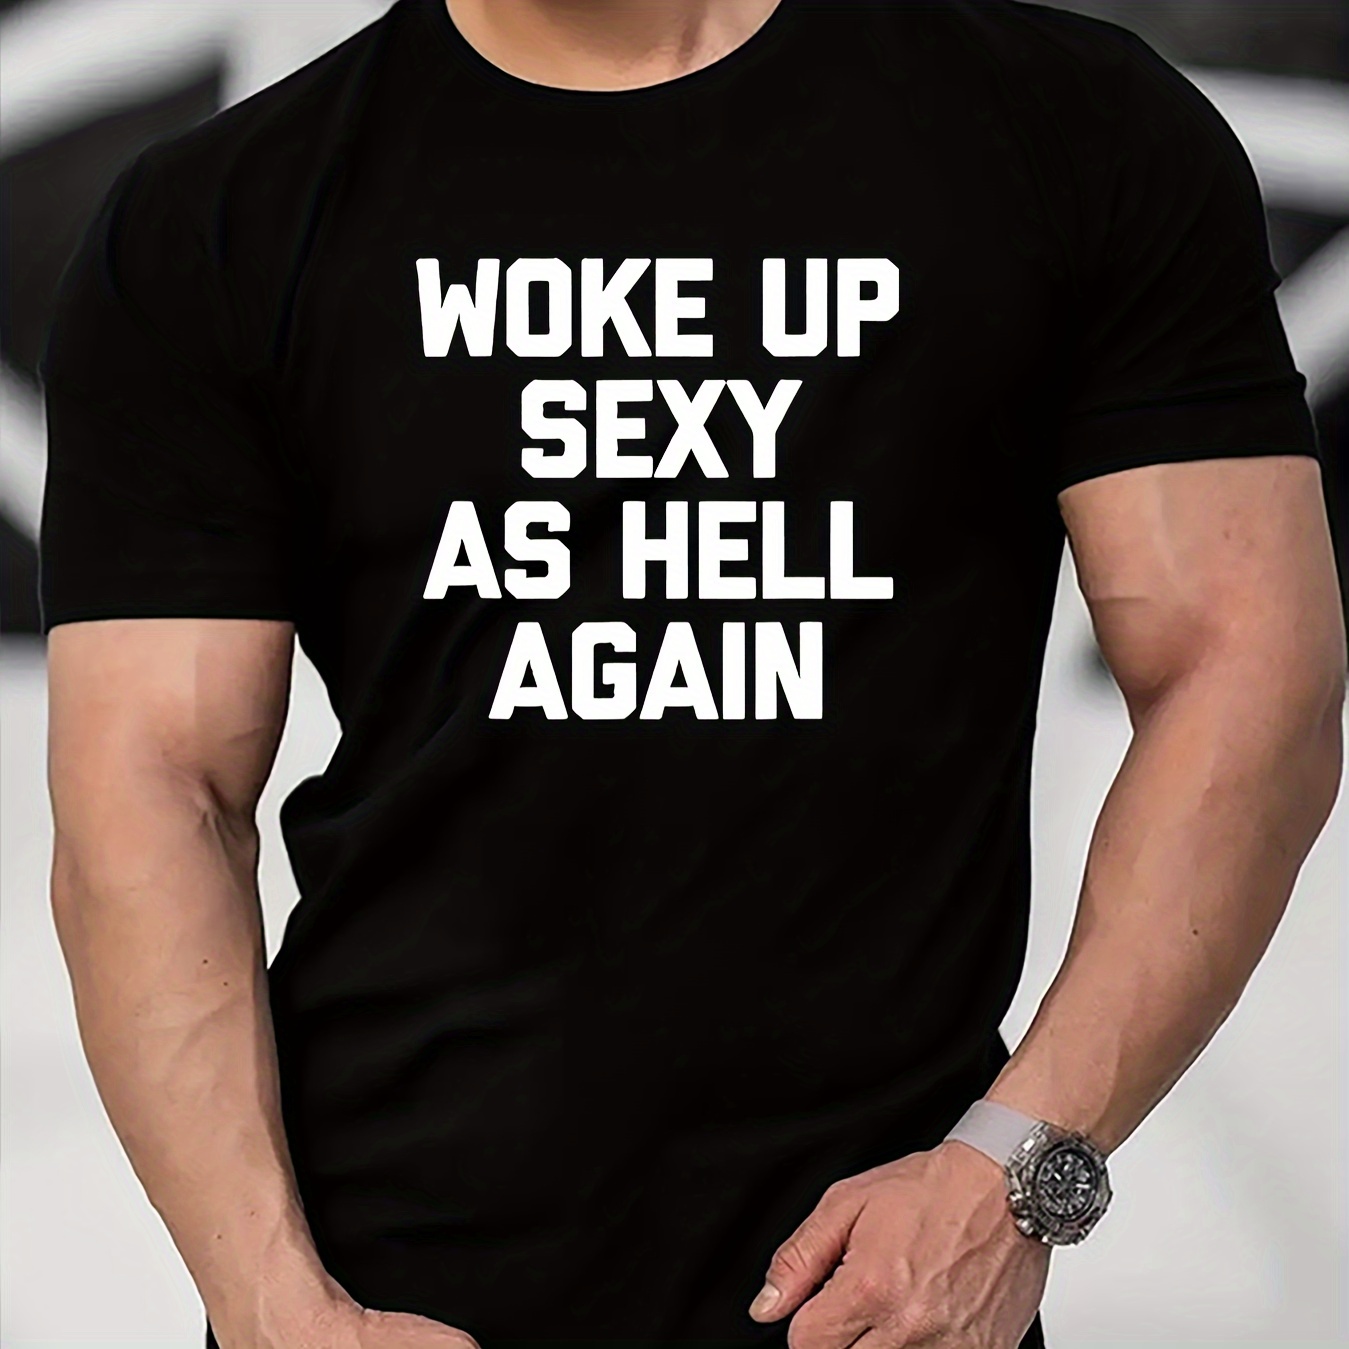 

woke Up-sexy-as Hell-again" Letters Print Casual Crew Neck Short Sleeves For Men, Quick-drying Comfy Casual Summer T-shirt For Daily Wear Work Out And Vacation Resorts